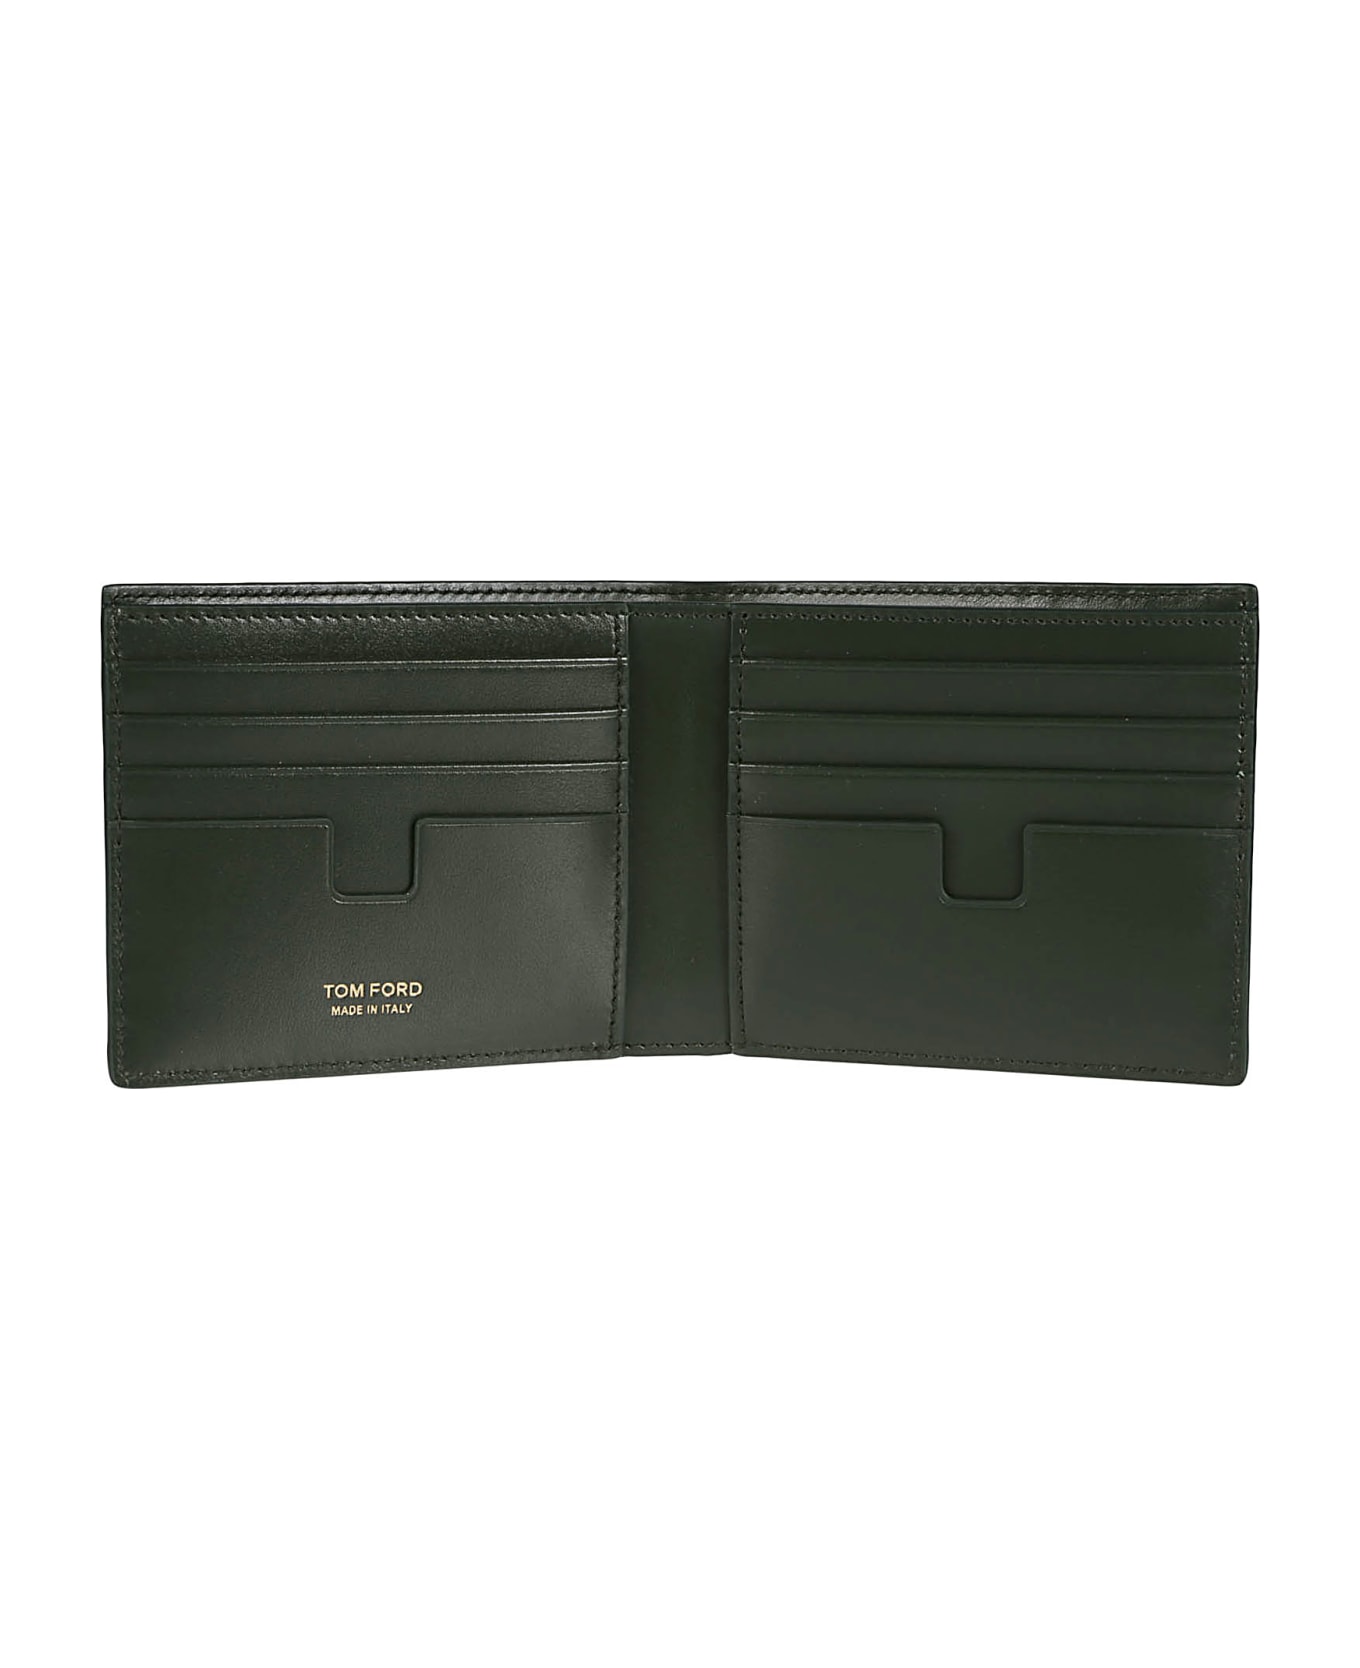 Tom Ford Printed Alligator Classic Bifold Wallet - Rifle Green